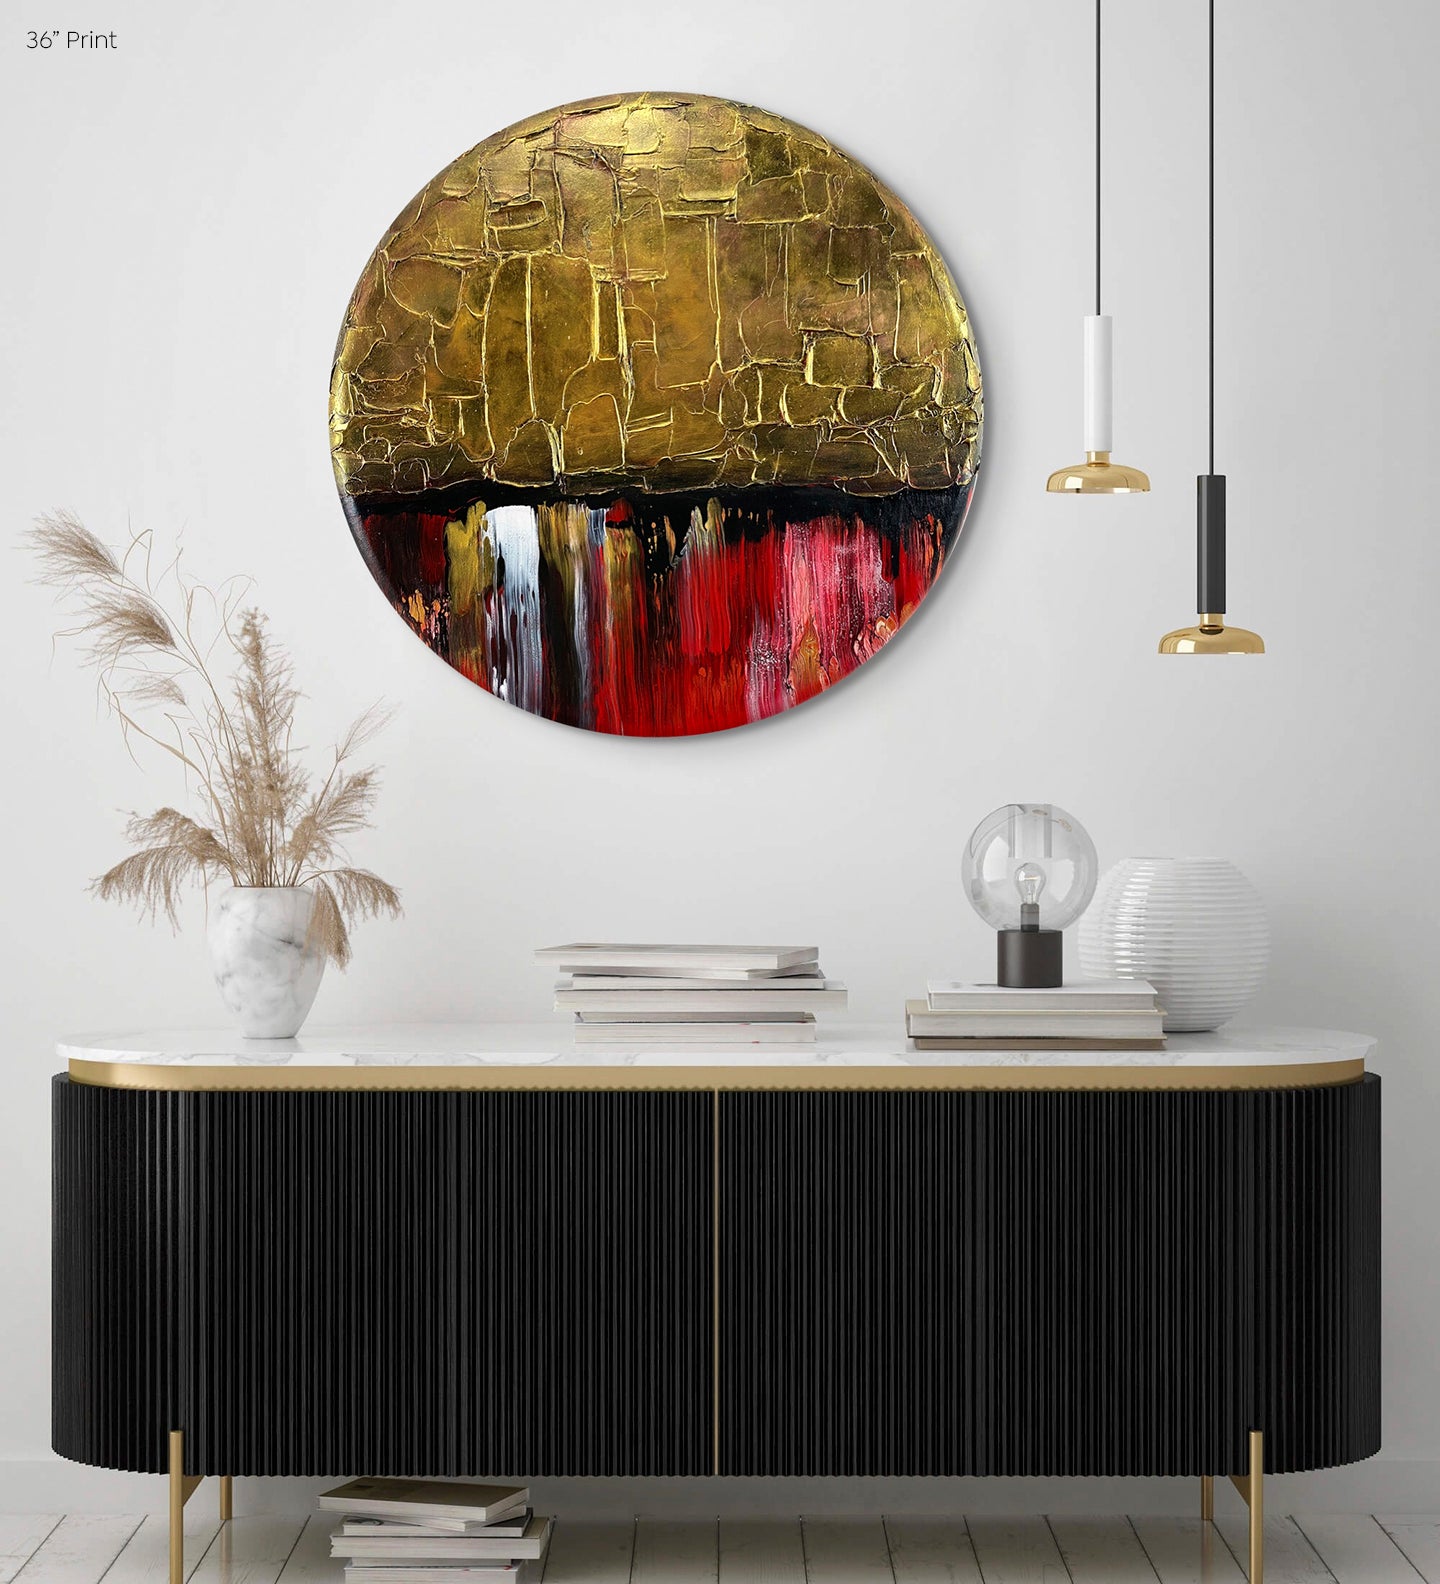 Abstract, acrylic and mixed-media painting on a round canvas with curved-edges shown on a white dining room wall above a side-table